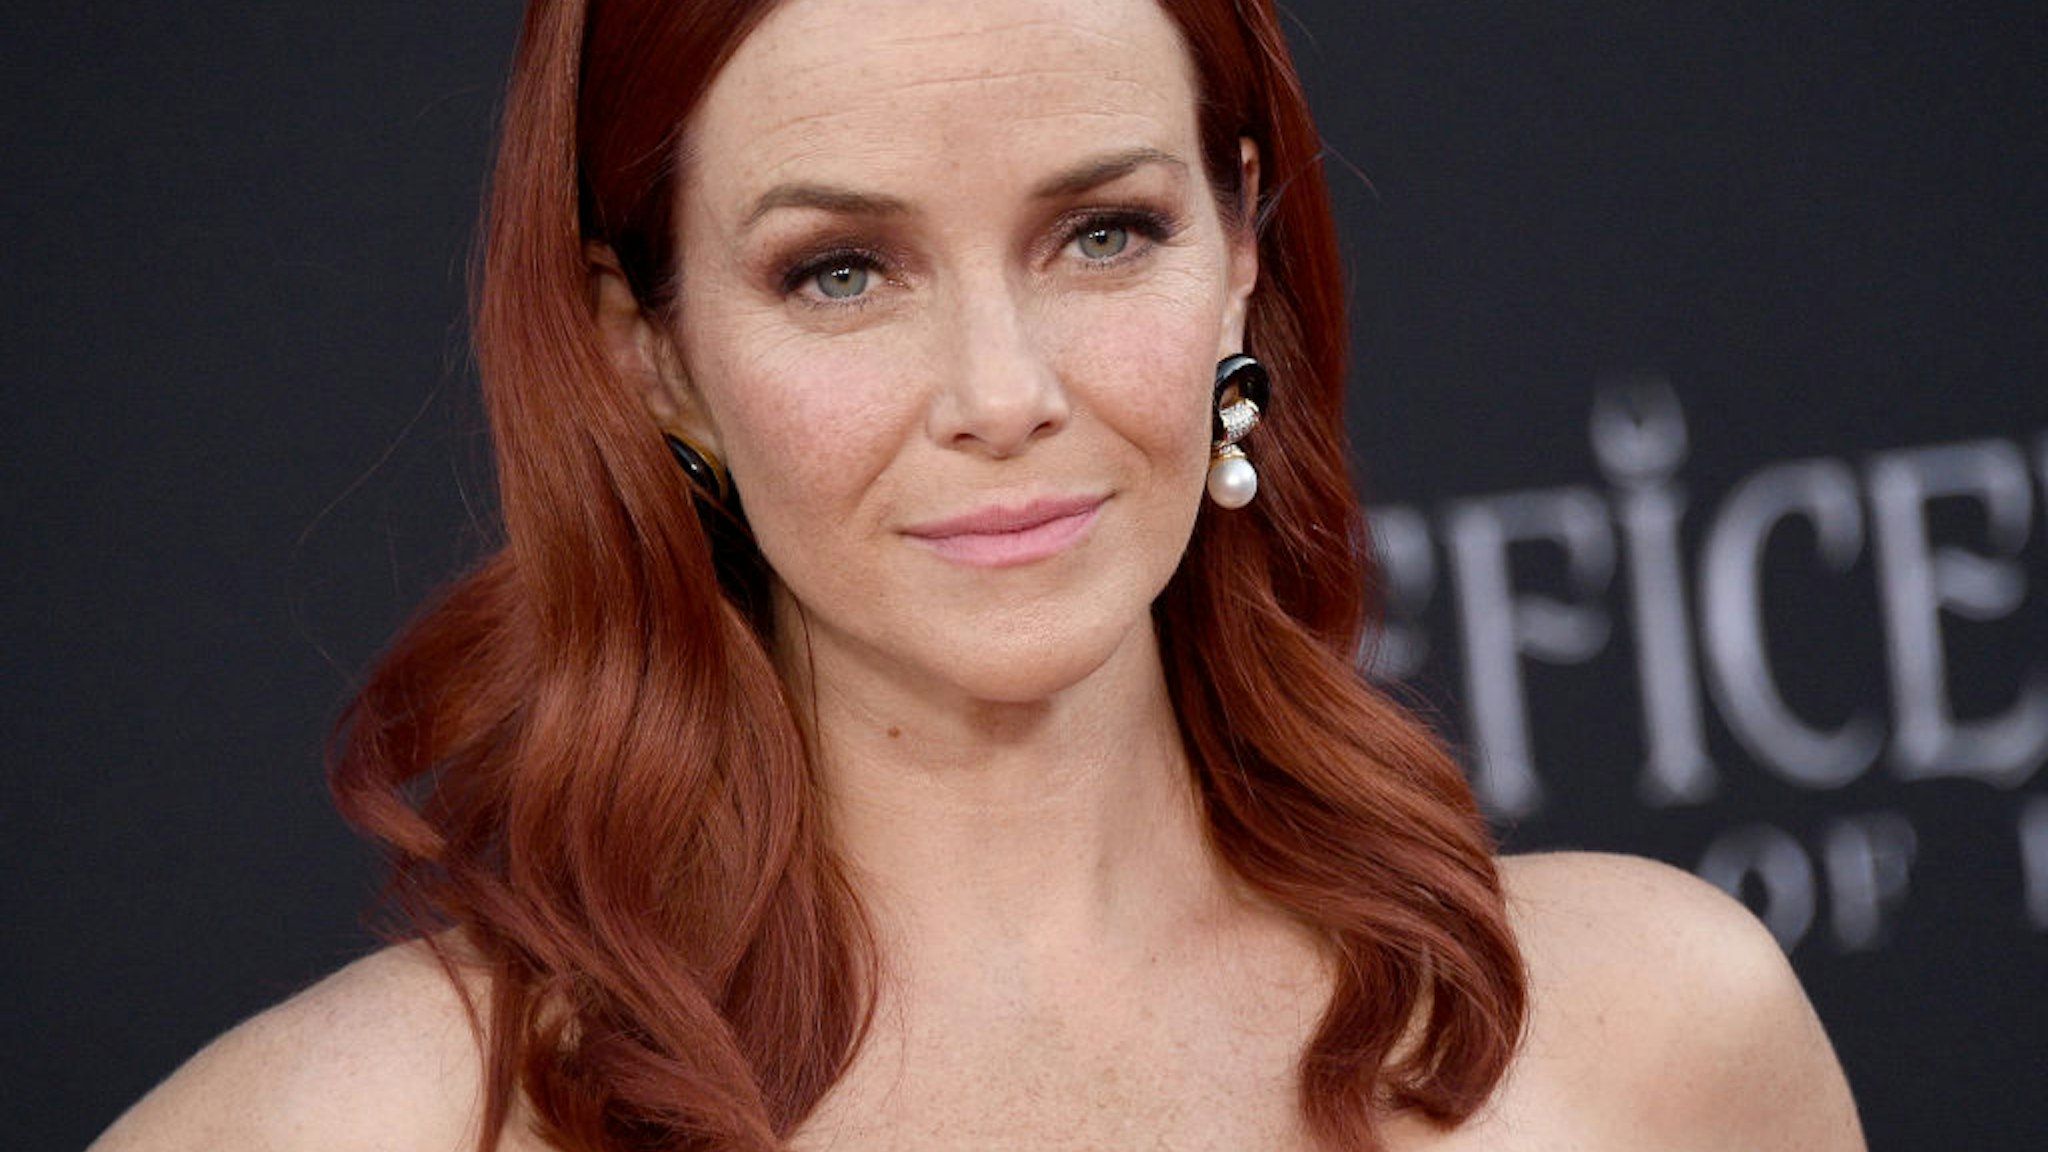 LOS ANGELES, CA - SEPTEMBER 30: Annie Wersching arrives at the World Premiere Of Disney's "Maleficent: Mistress Of Evil" at El Capitan Theatre on September 30, 2019 in Los Angeles, California. (Photo by Gregg DeGuire/FilmMagic)